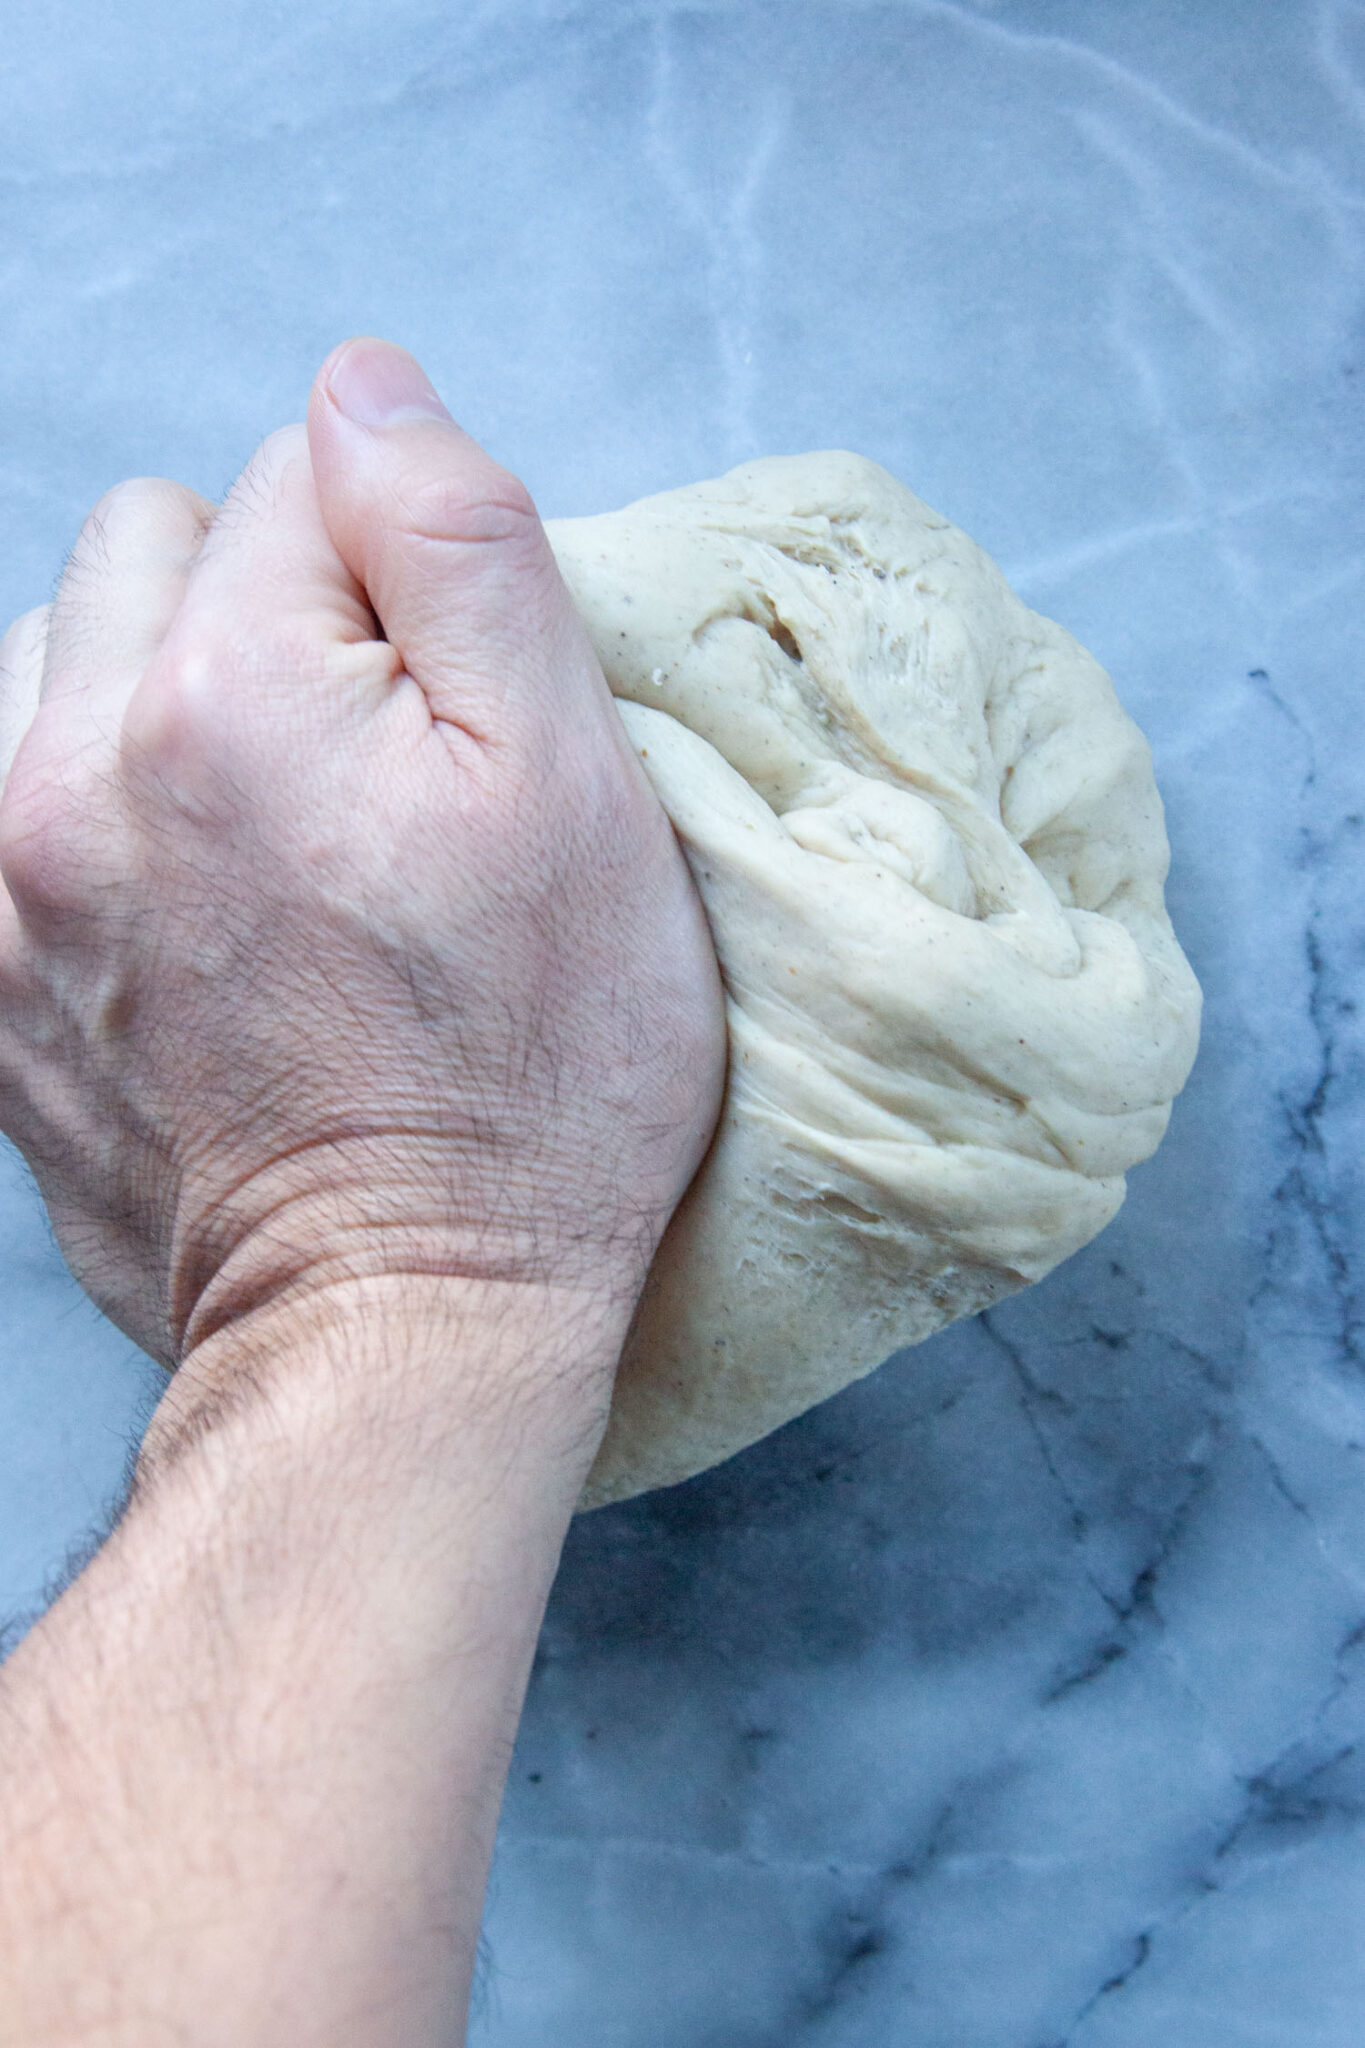 A hand kneading dough on a marble surface.